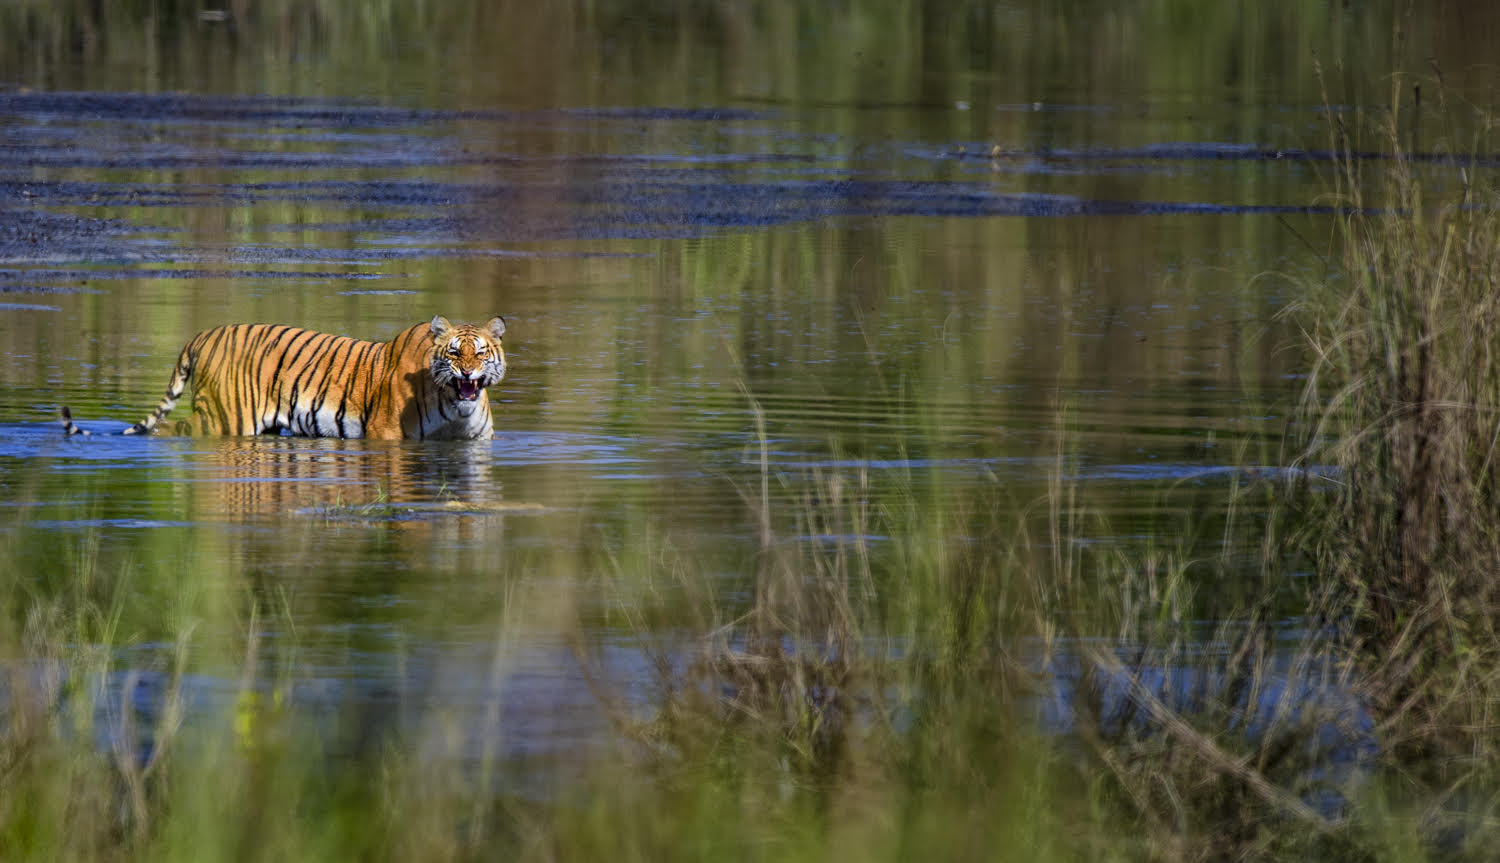 The elusive tiger - Courtesy of Fanny Lai and Bjorn Olesen